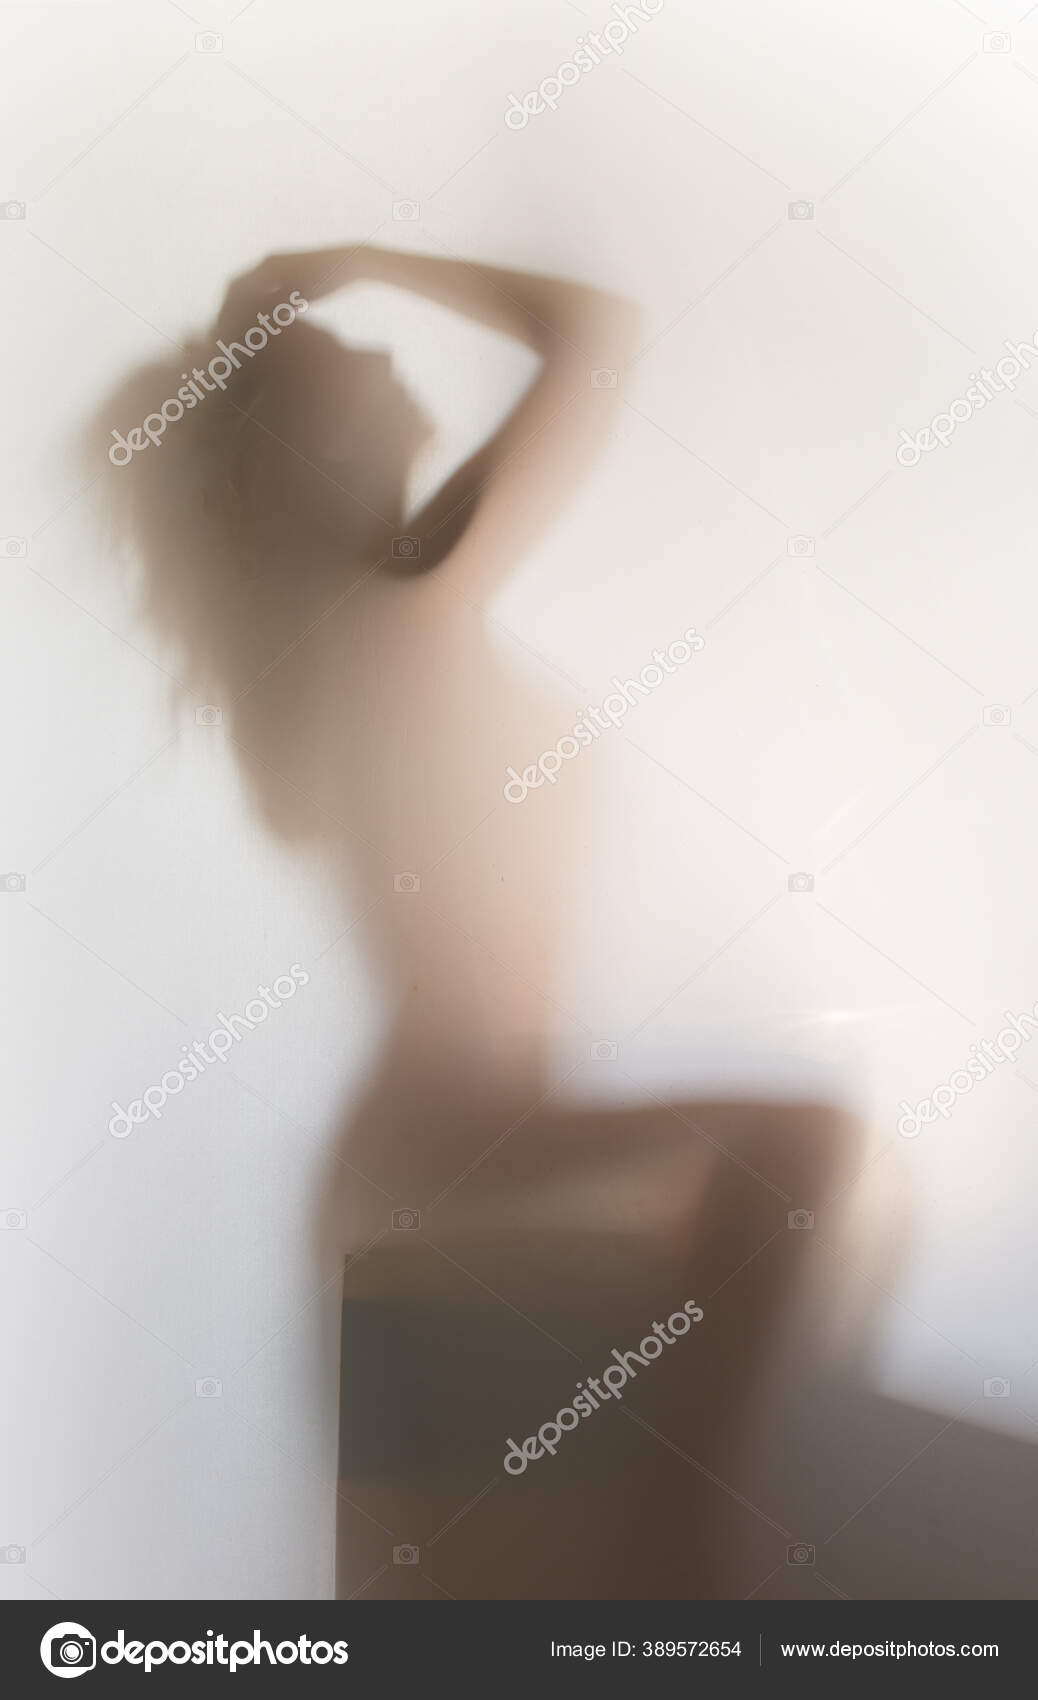 Wallpapers erotic babes blurry art